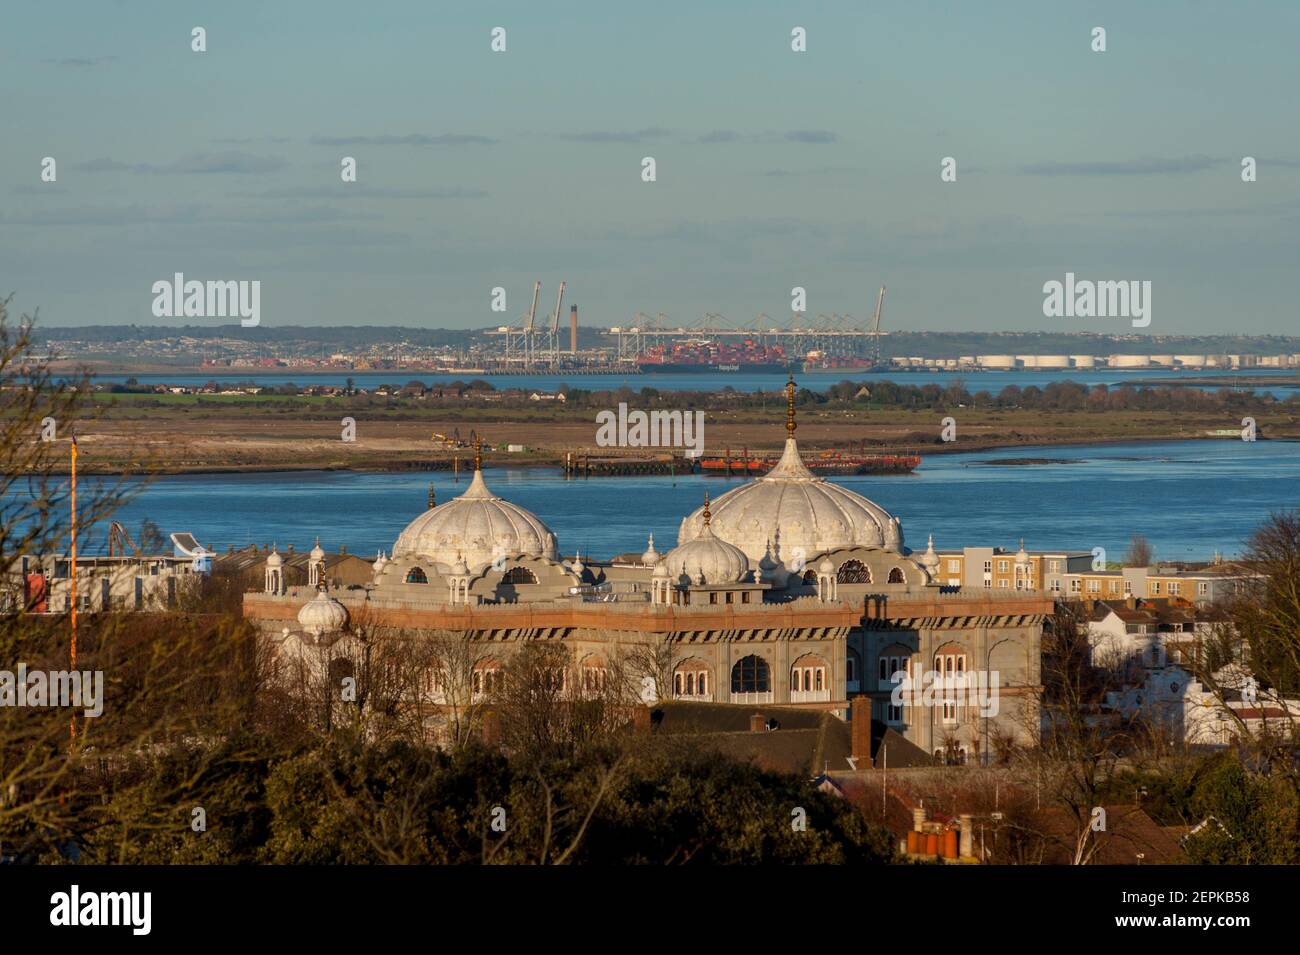 Looking across the domes of the Sikh temple Gravesend and across the Thames estuary towards Thamesport in Essex Stock Photo